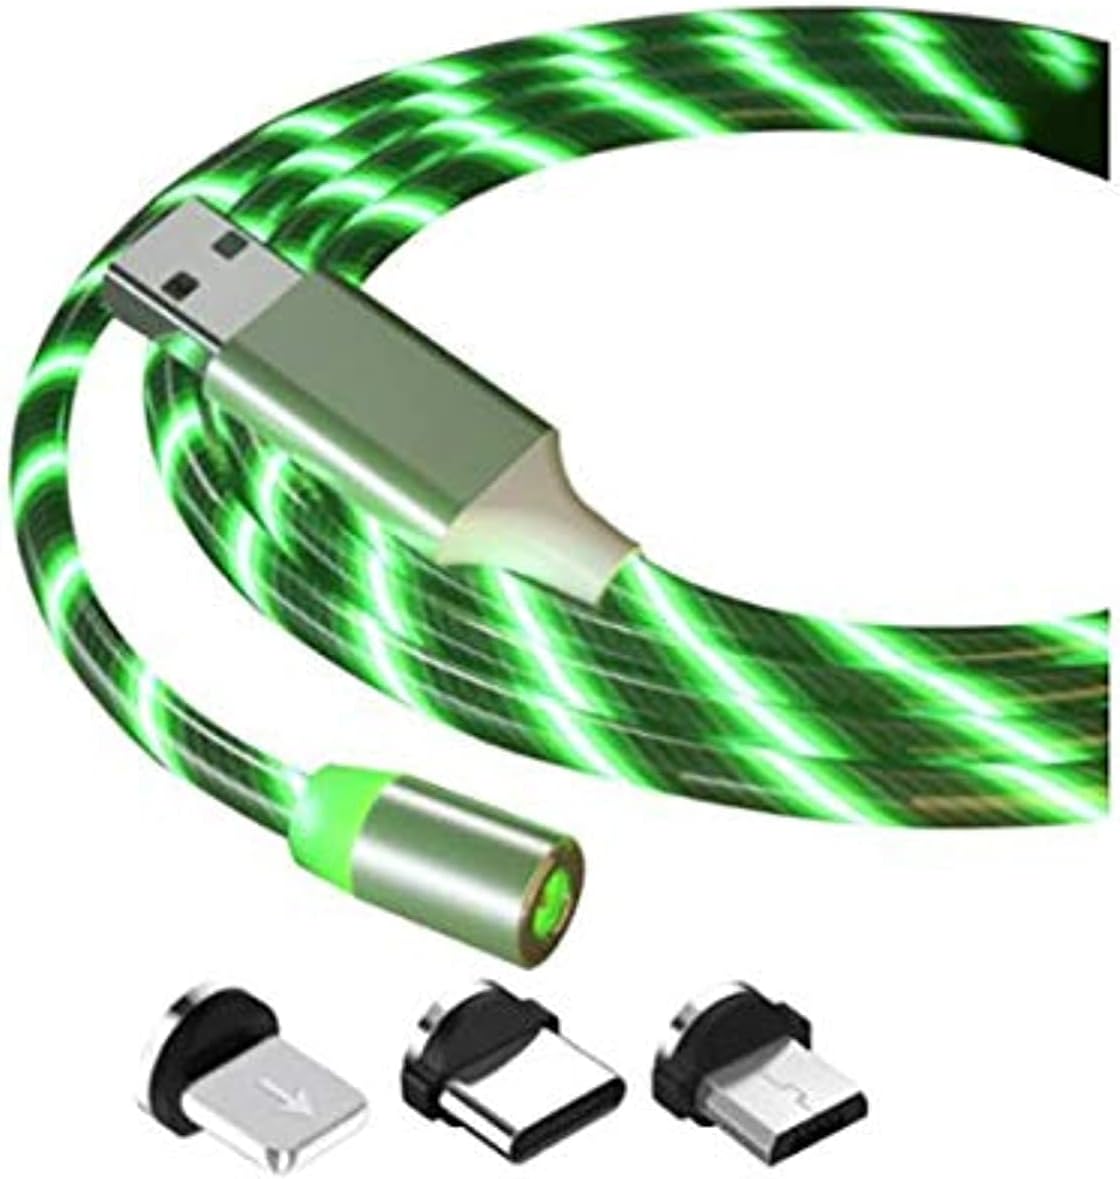 3 in 1 Glow LED Lighting Fast Charging Magnetic USB Type C Micro Charger Cable Wire (Green)